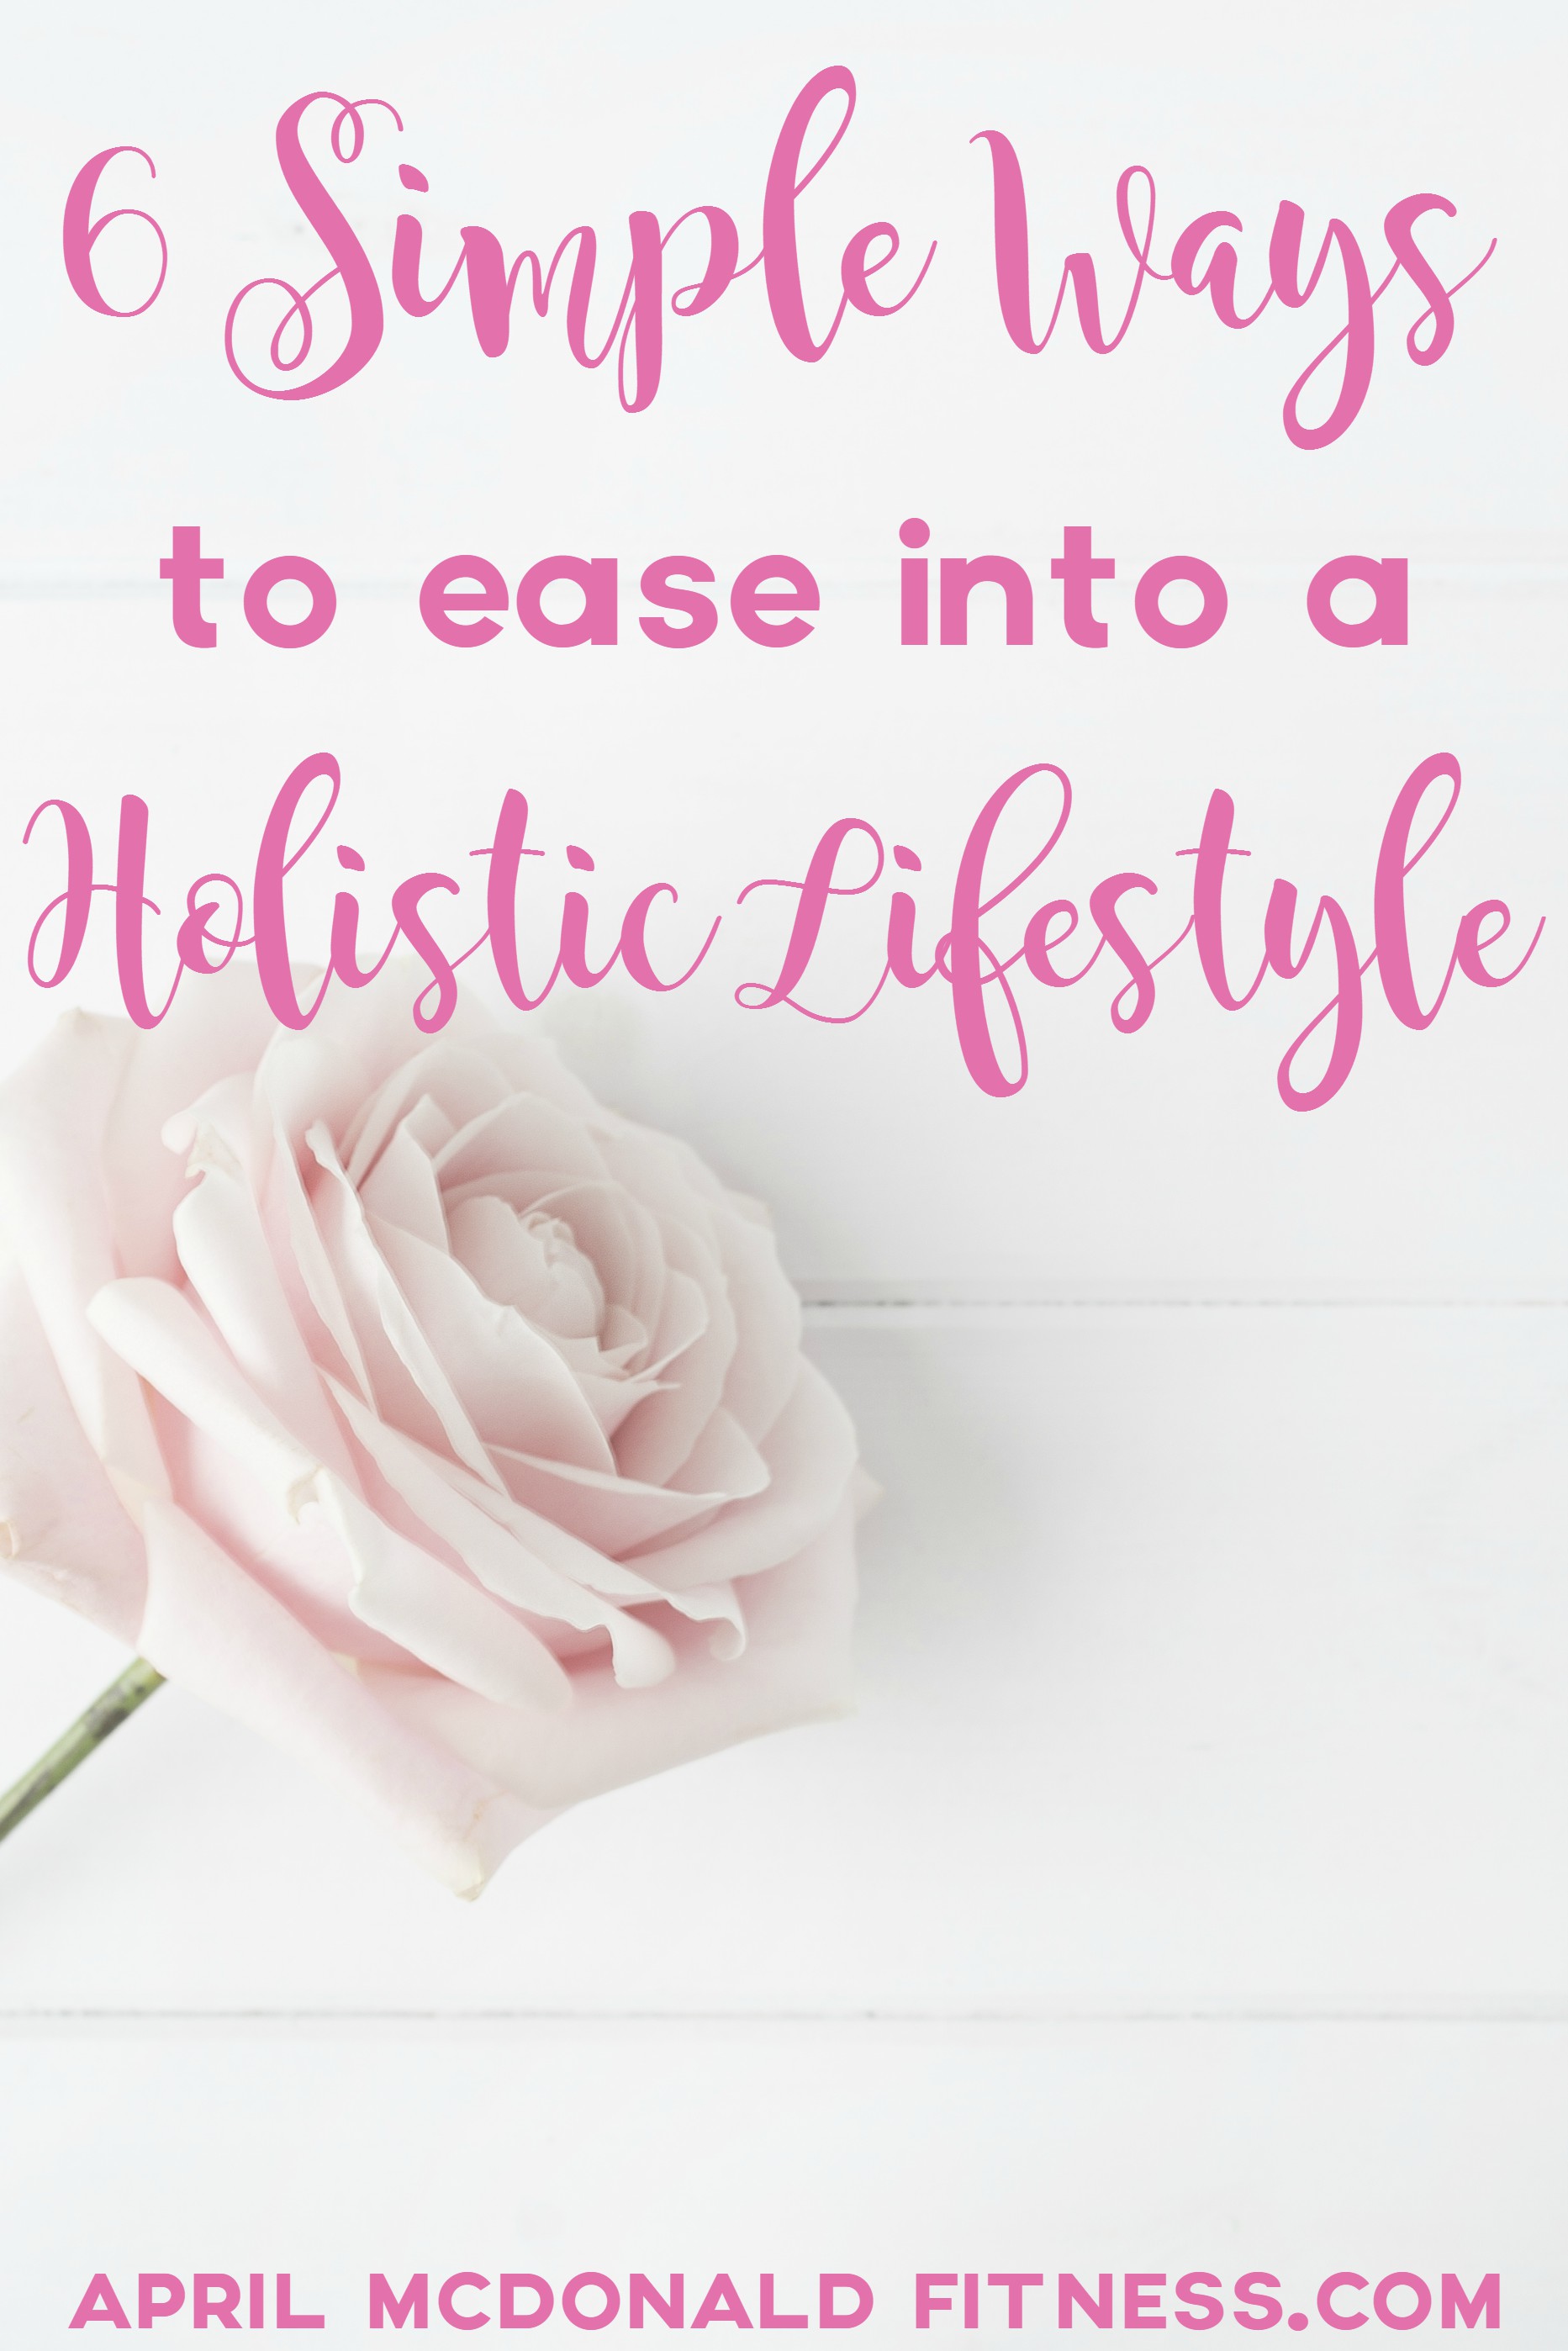 Learning to live a holistic lifestyle doesn't have to be hard. Take it step by step. Start with these 6 simple steps to ease into a holistic lifestyle.